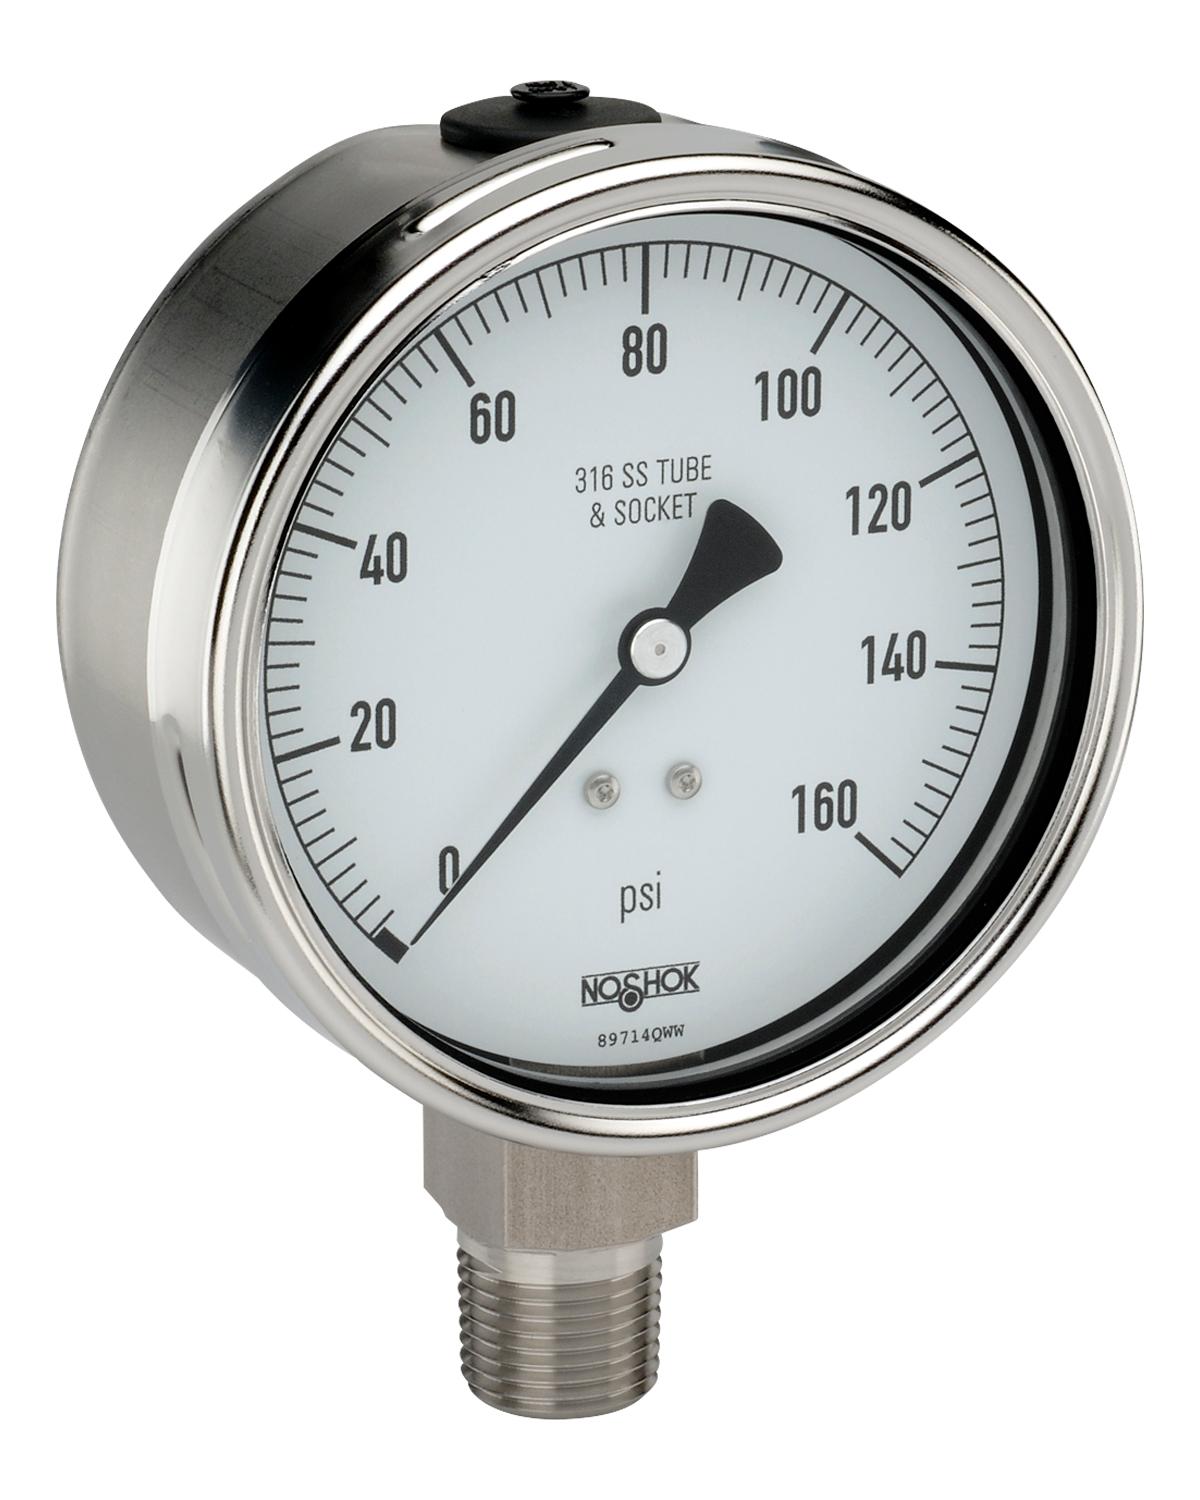 Noshok 40-500-300-PSI/BAR 4'' 304 Stainless Steel Case, 316 Stainless Steel Internals, 300 psi/bar, 1/2'' National Pipe Thread (NPT) Male Bottom Connection Pressure Gauge with Glycerin Filled